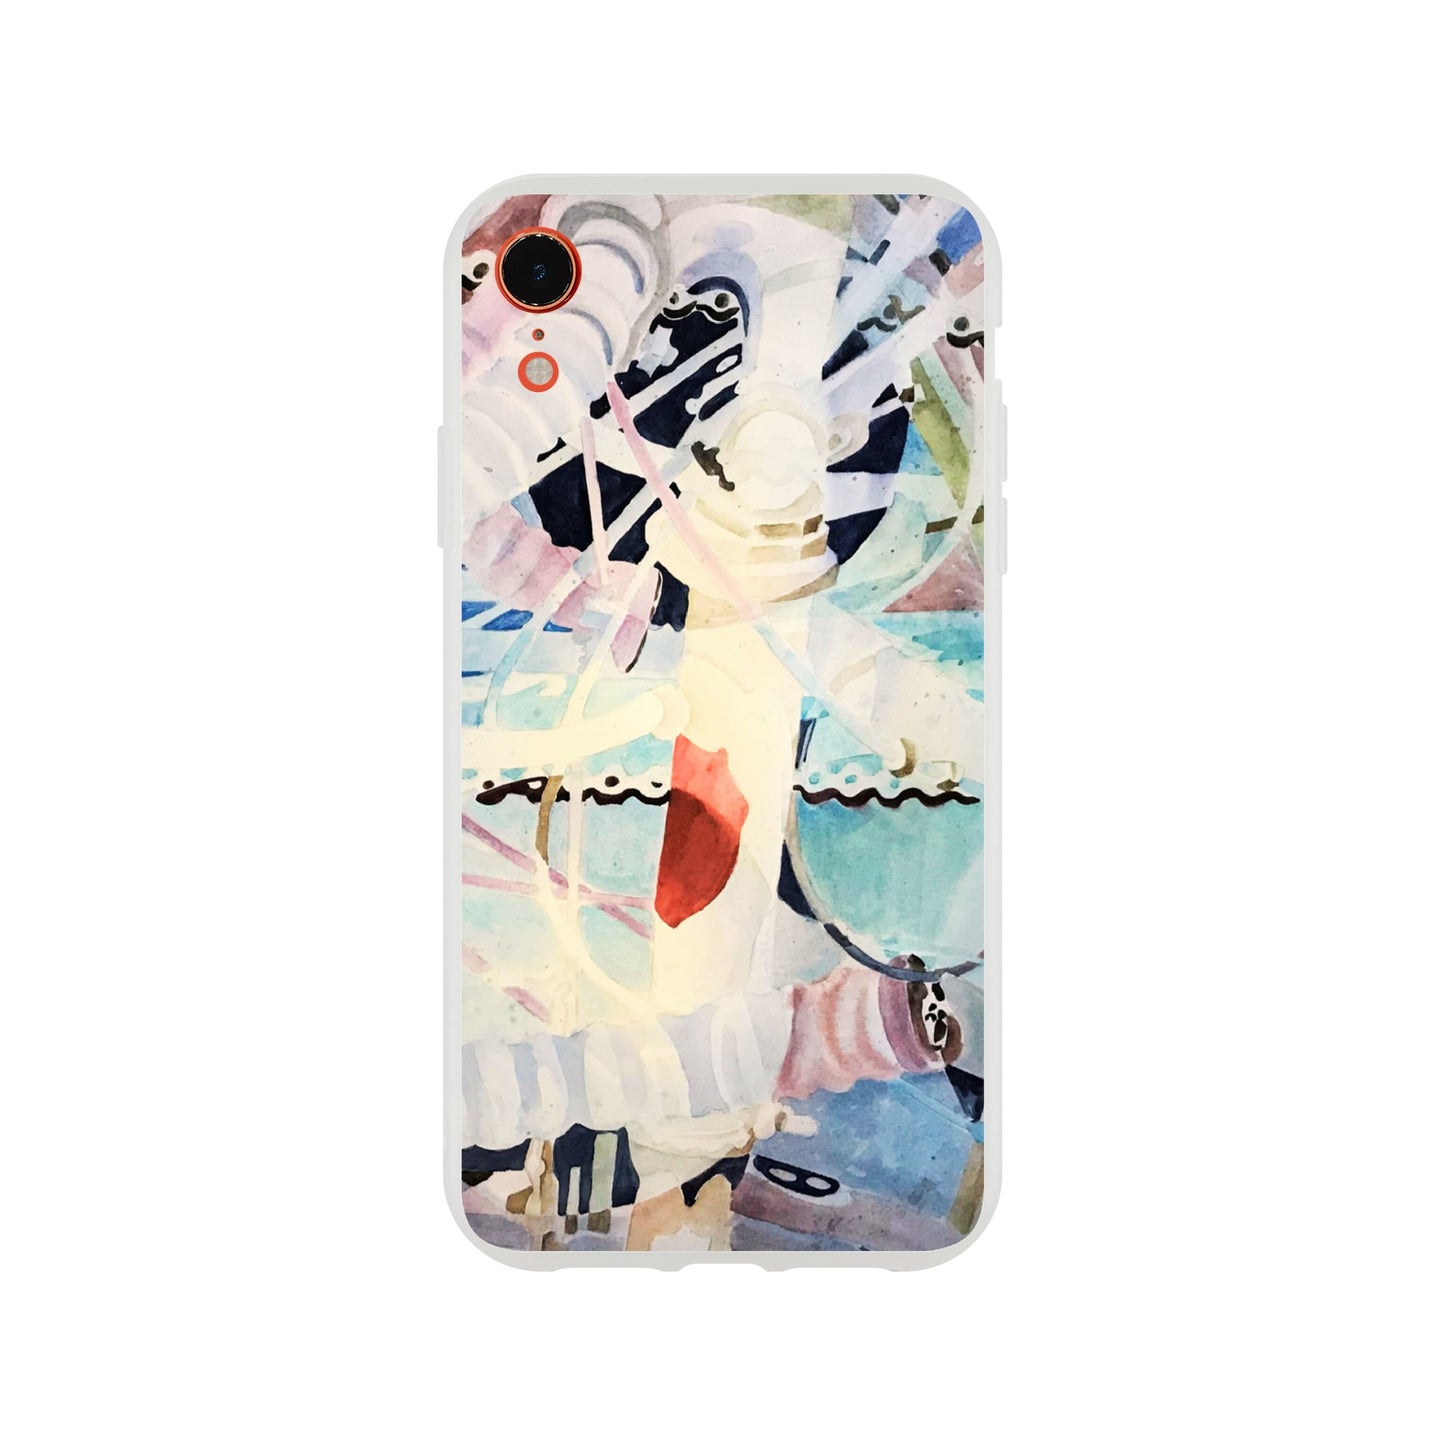 "Wheel in a Wheel" Flexi Phone Case for Iphone or Samsung by Barbara Cleary Designs